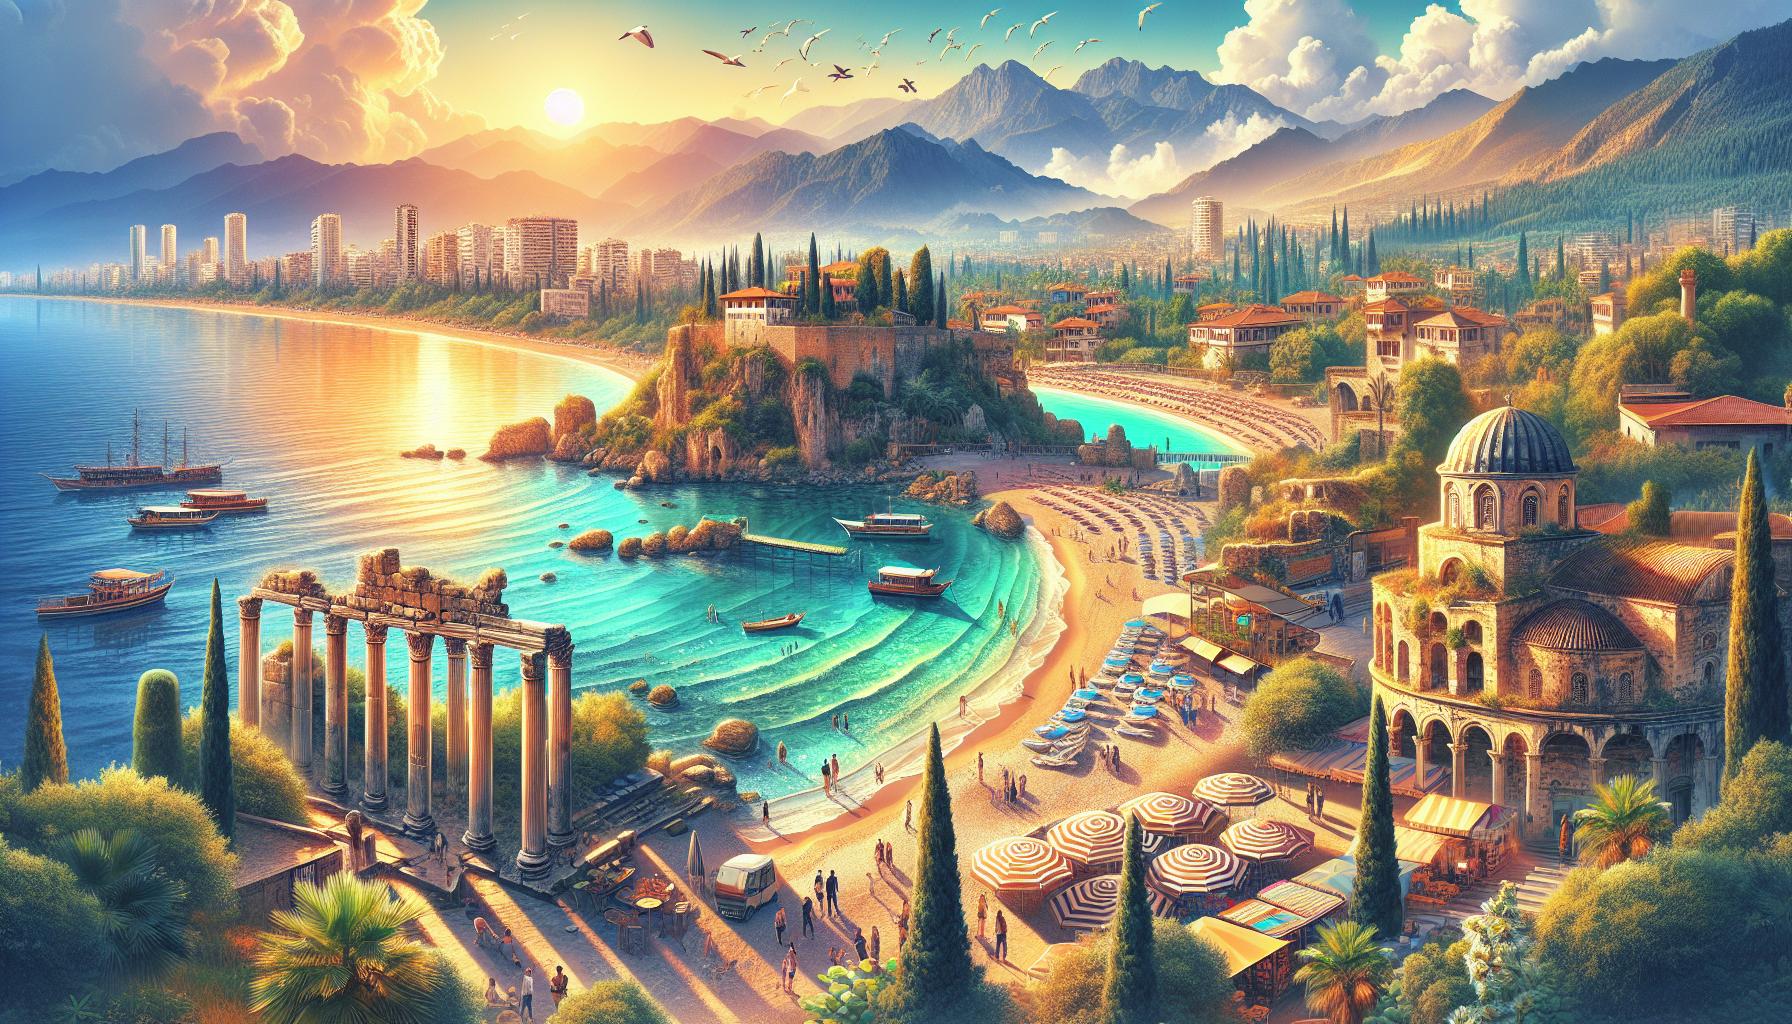 Top 10 Free Things to Do in Antalya for an Unforgettable Holiday